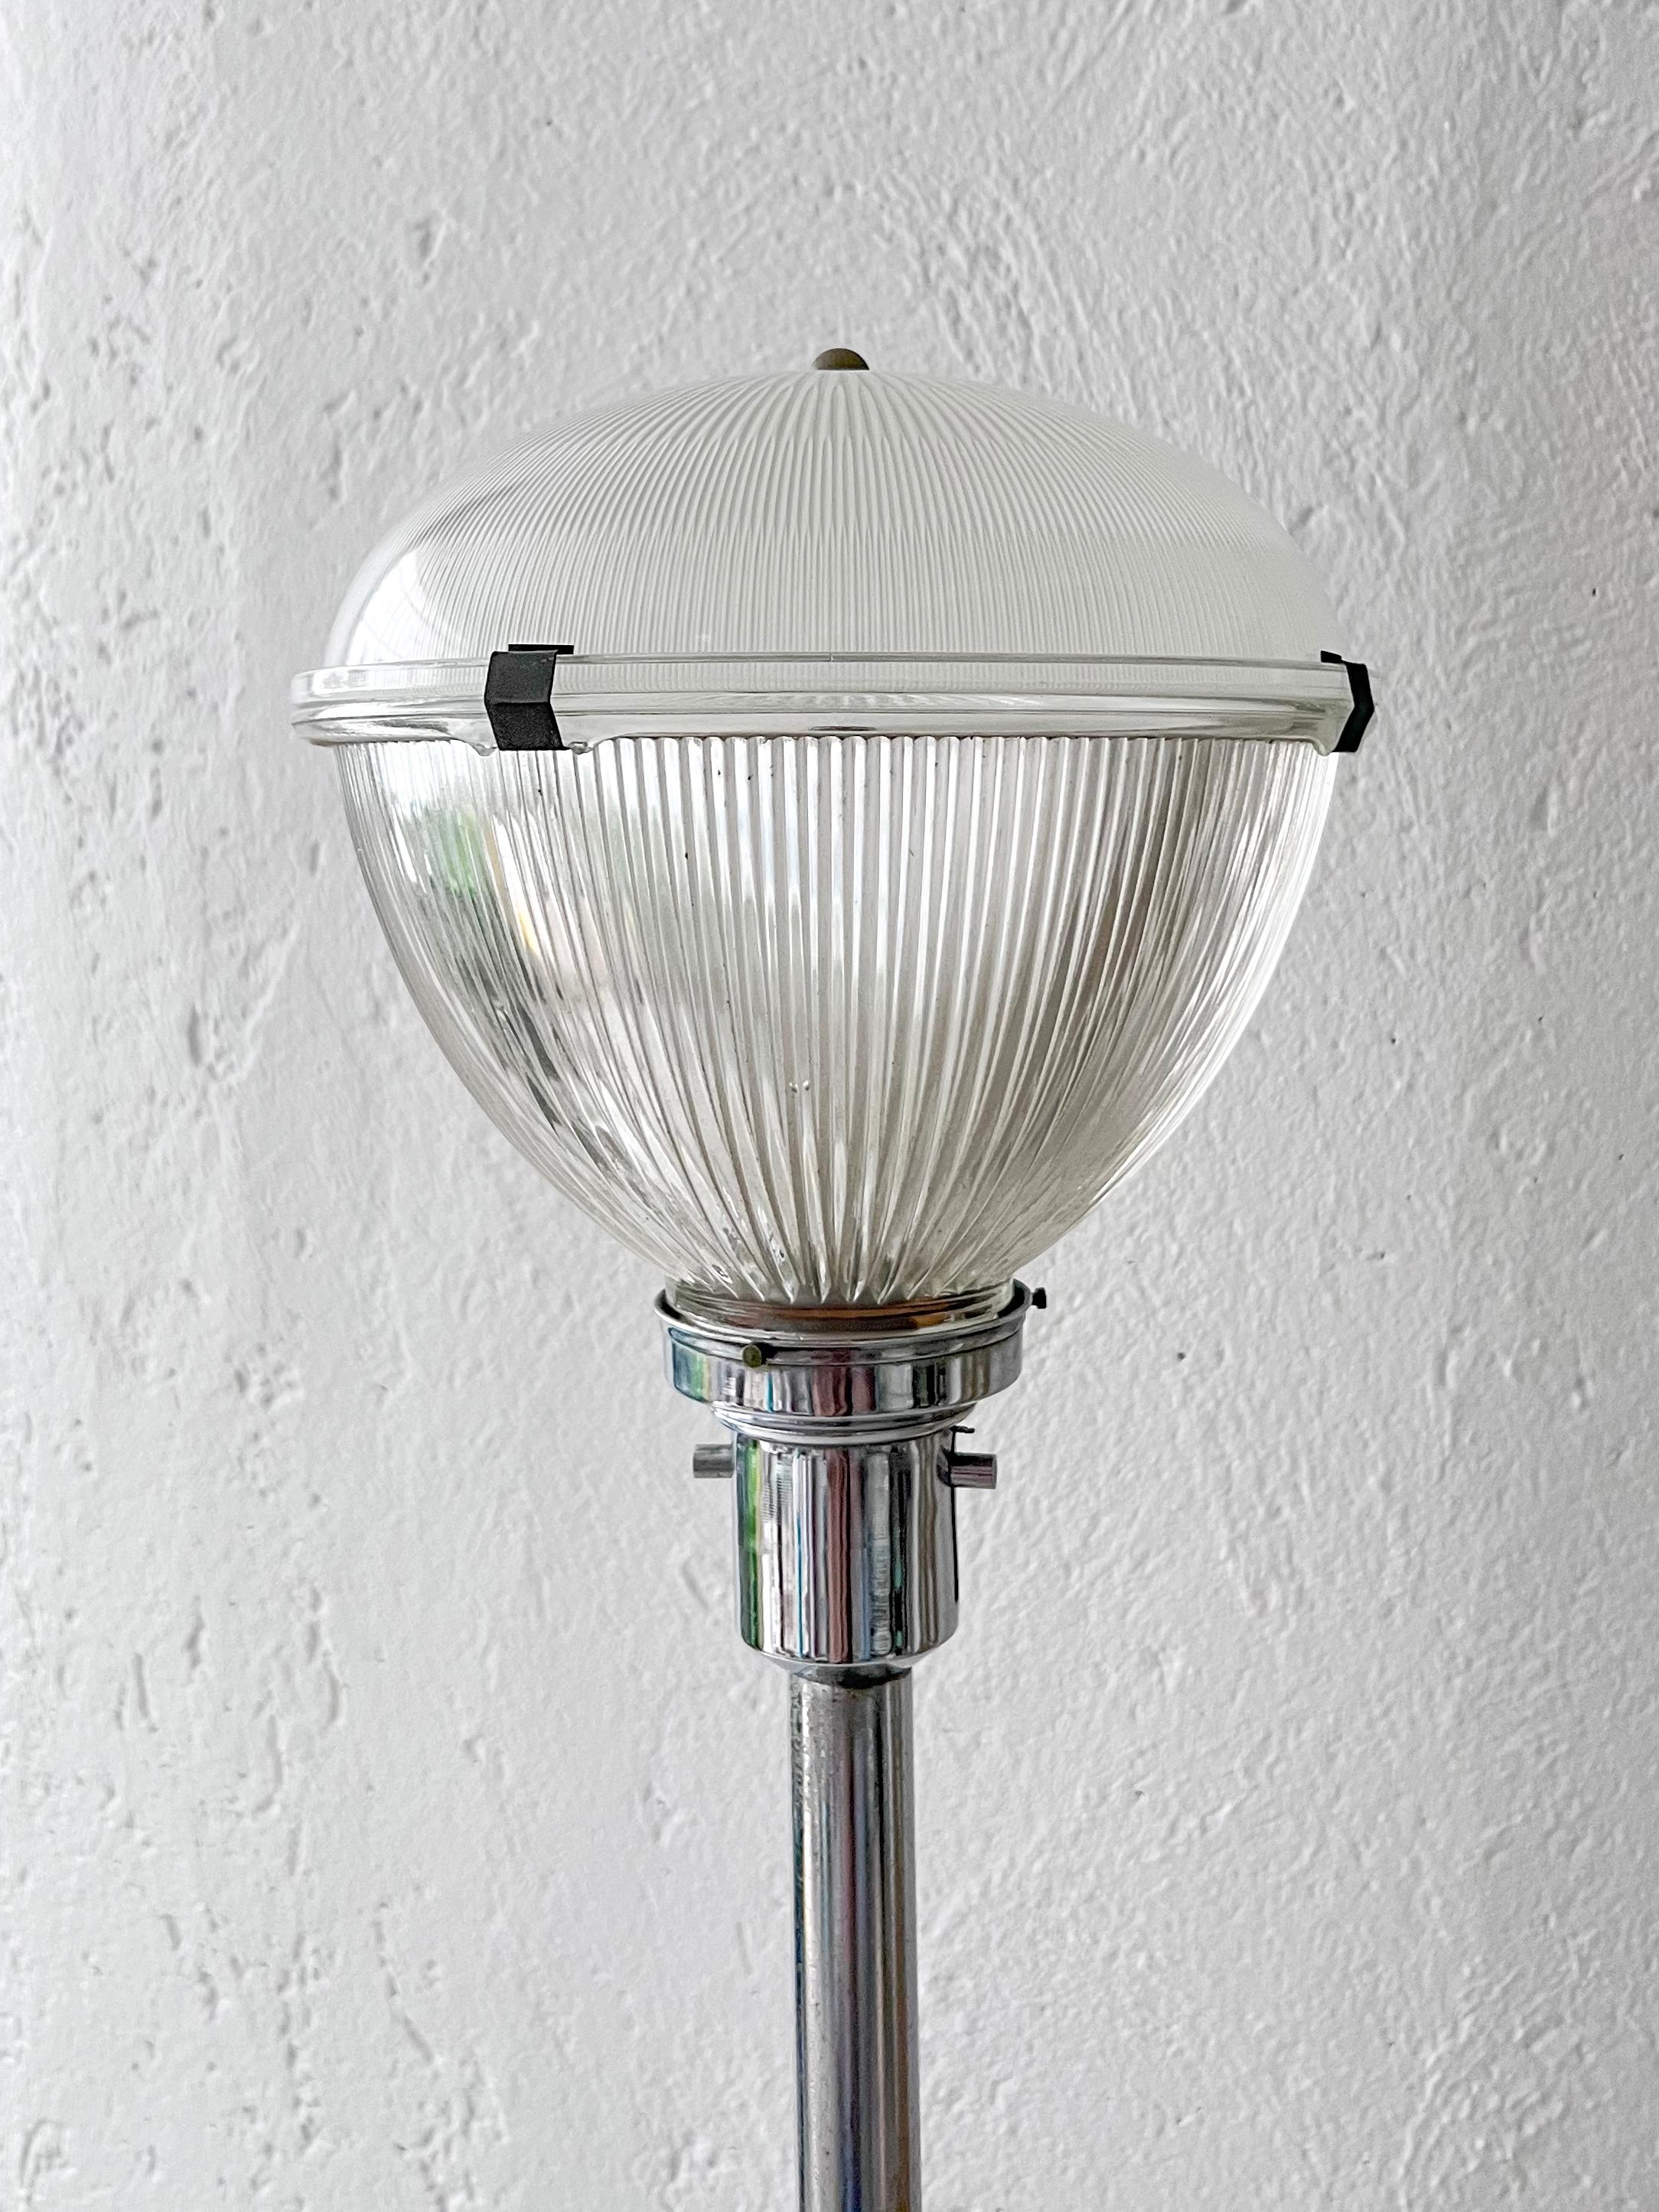 Mid-Century Modern Floor Lamp - Chromed Metal Lamp - Ignazio Gardella Style

Vintage Italian Mid-Century Modern floor lamp in chromed metal and glass. Timeless in style, the top glass element looks exactly the same as some lamps designed by Ignazio